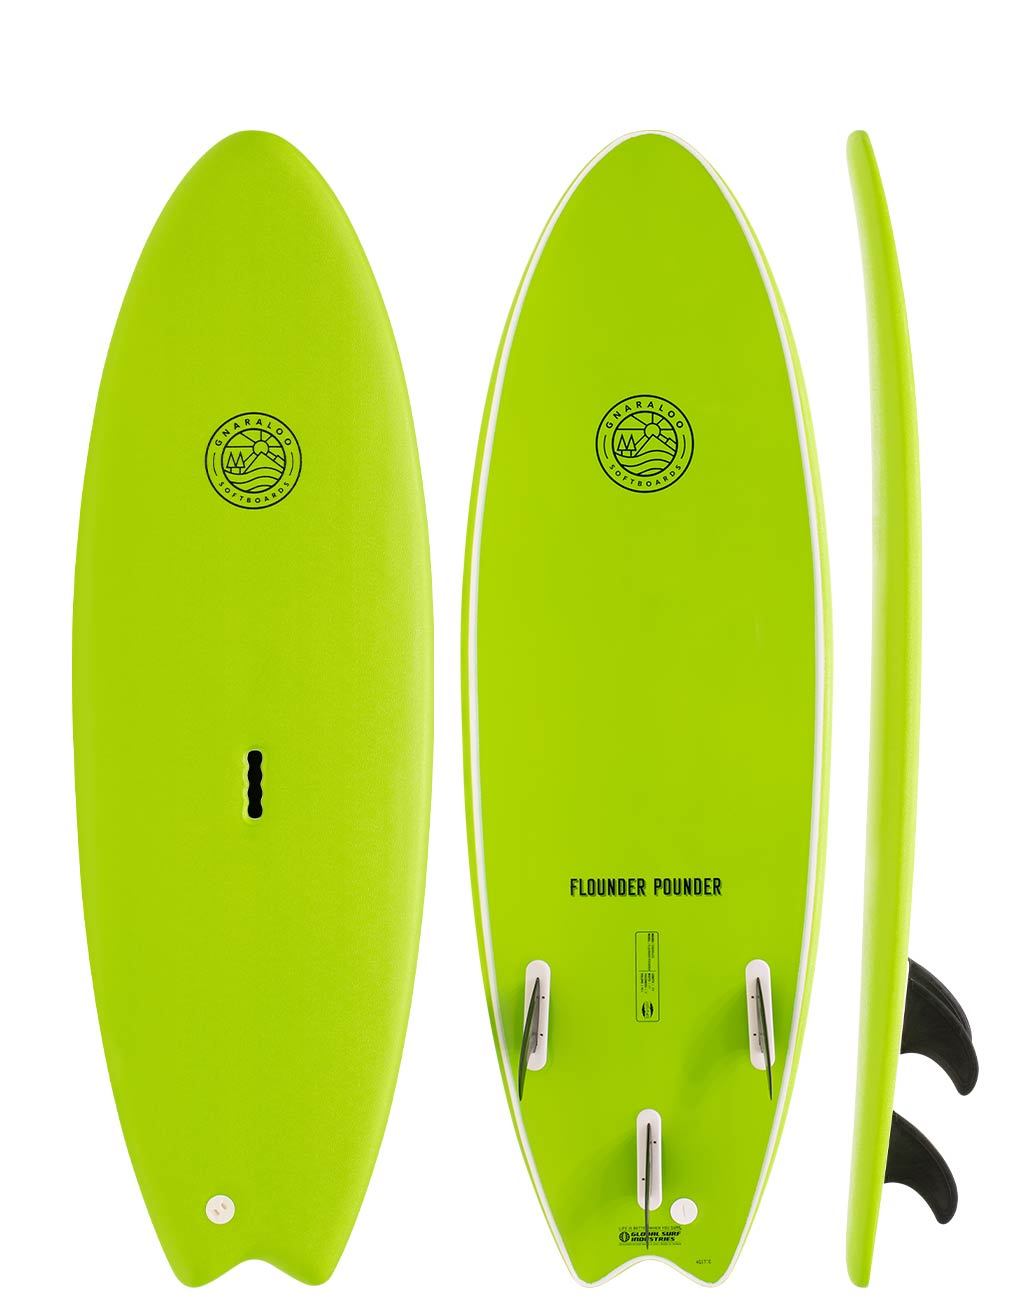 Gnaraloo 6'6 Flounder Pounder Softboard neon green with handle 